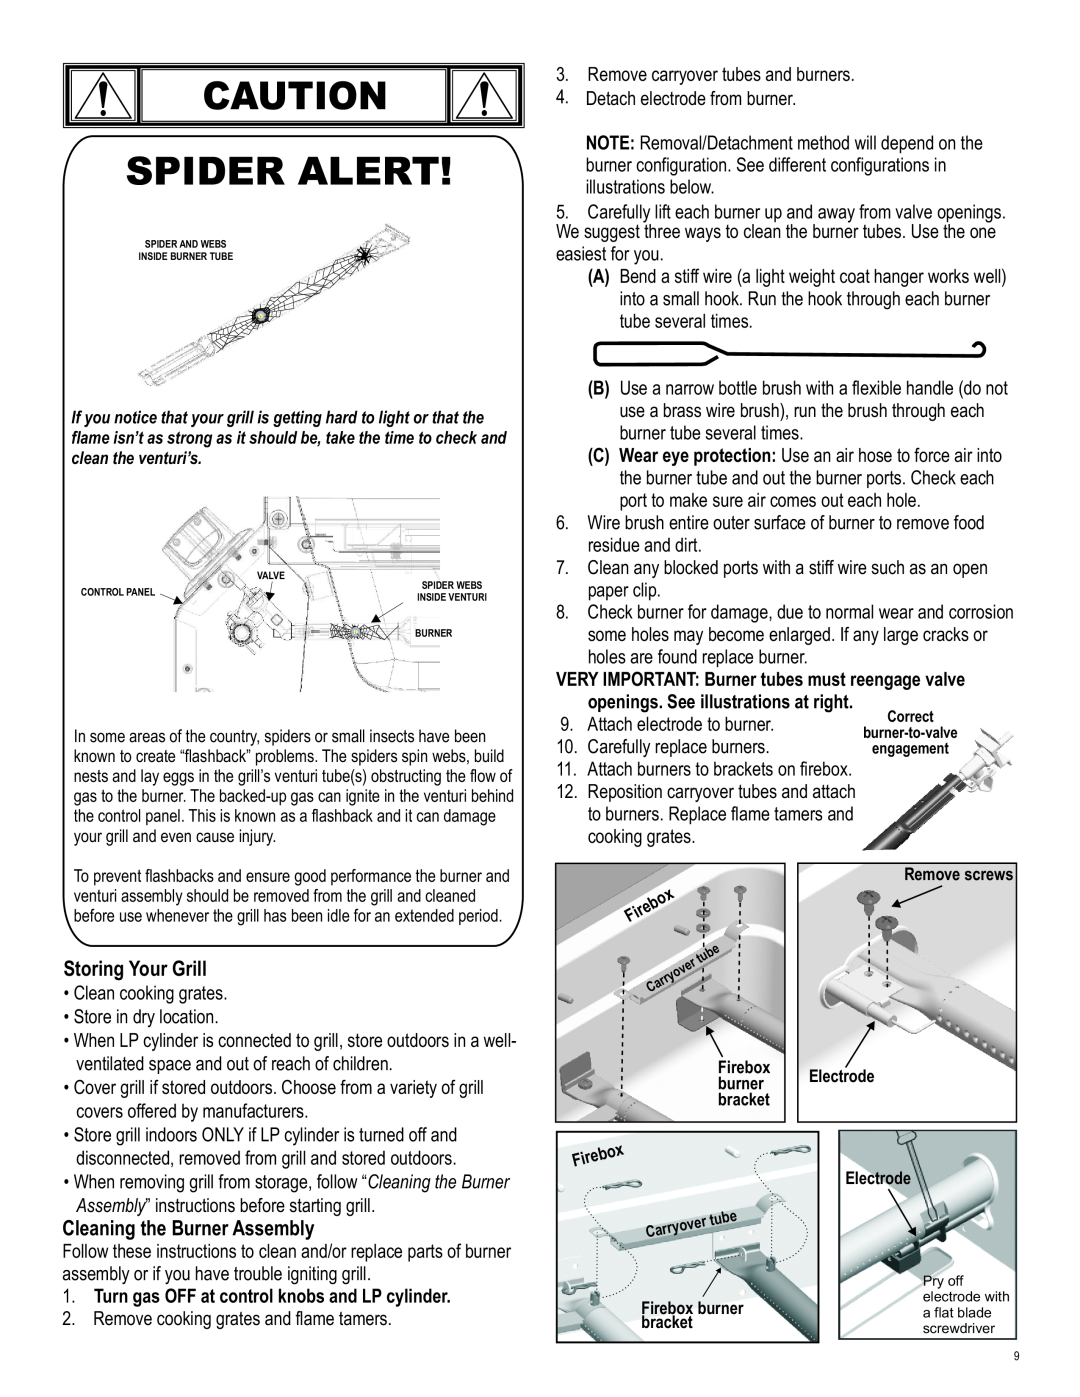 Char-Broil 463247412 manual Spider Alert, Storing Your Grill, Cleaning the Burner Assembly 